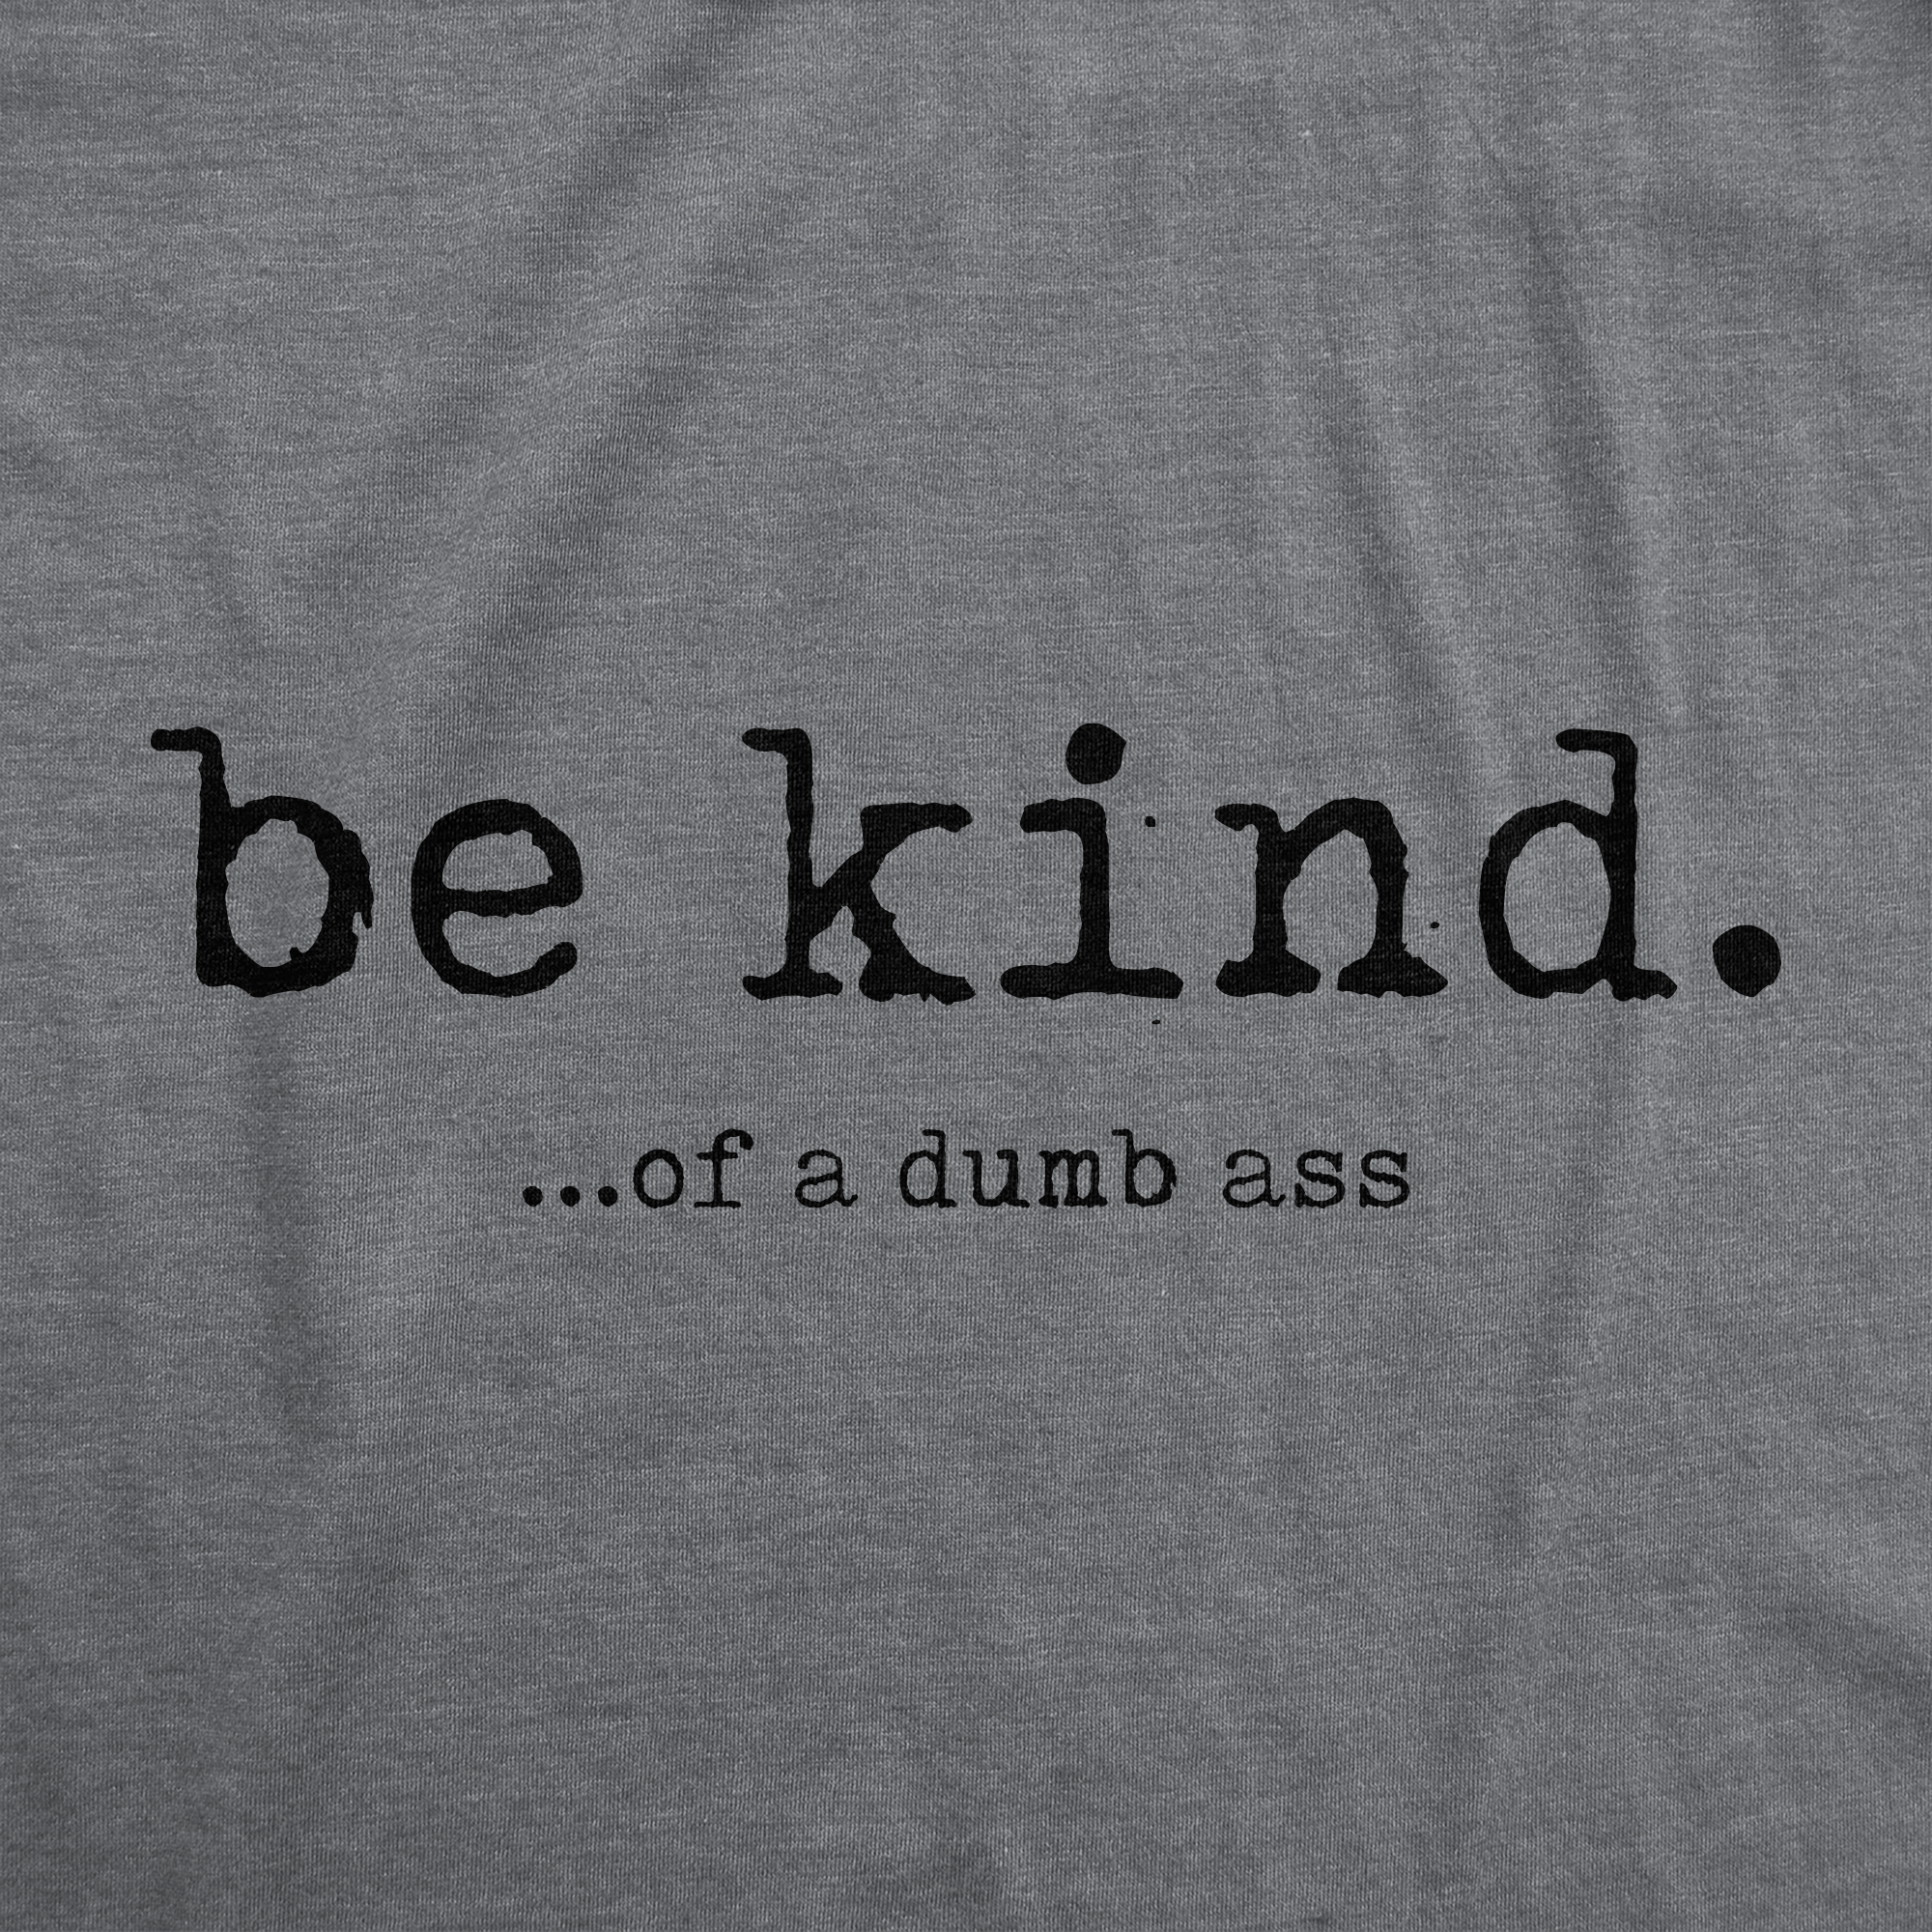 Funny Dark Heather Grey - Be Kind Of A Dumbass Be Kind Of A Dumbass Mens T Shirt Nerdy sarcastic Tee